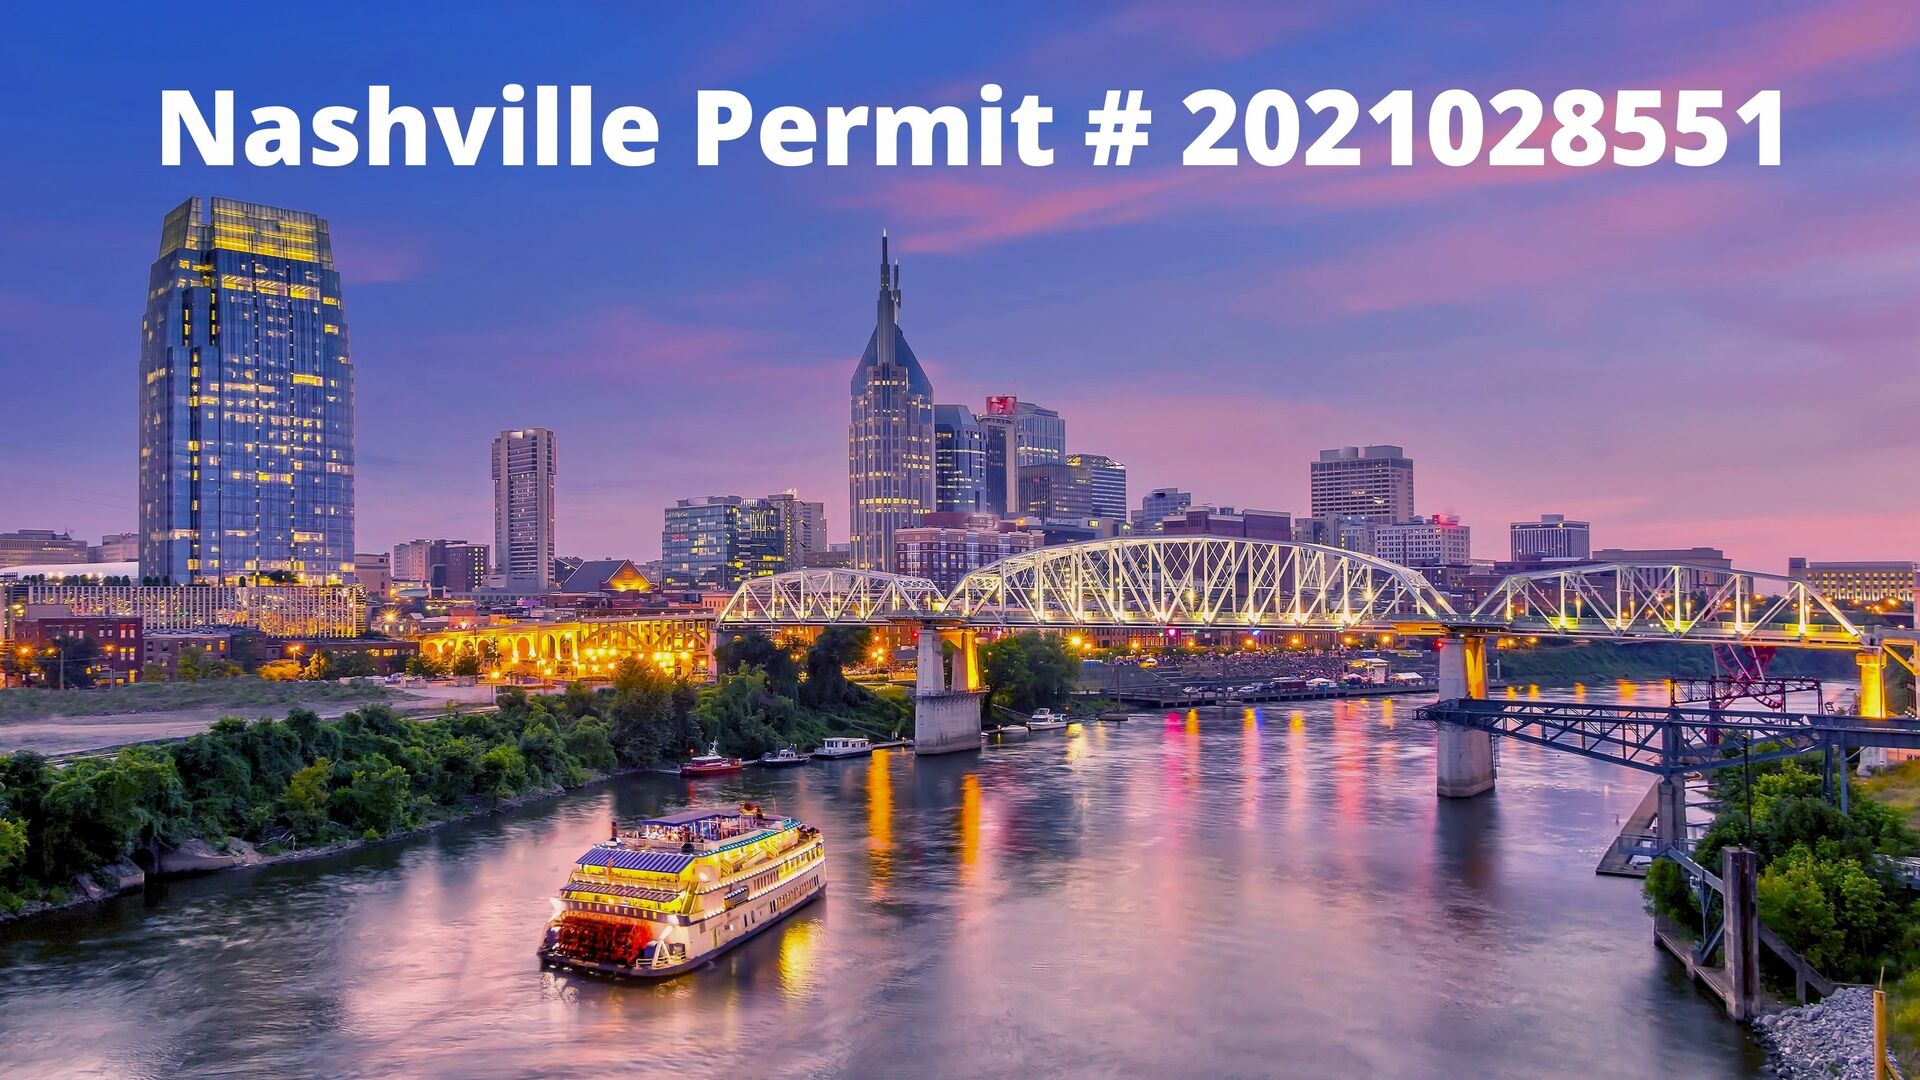 Nashville Permit Issued In 2021 followed by:2021028551 (1st Unit)